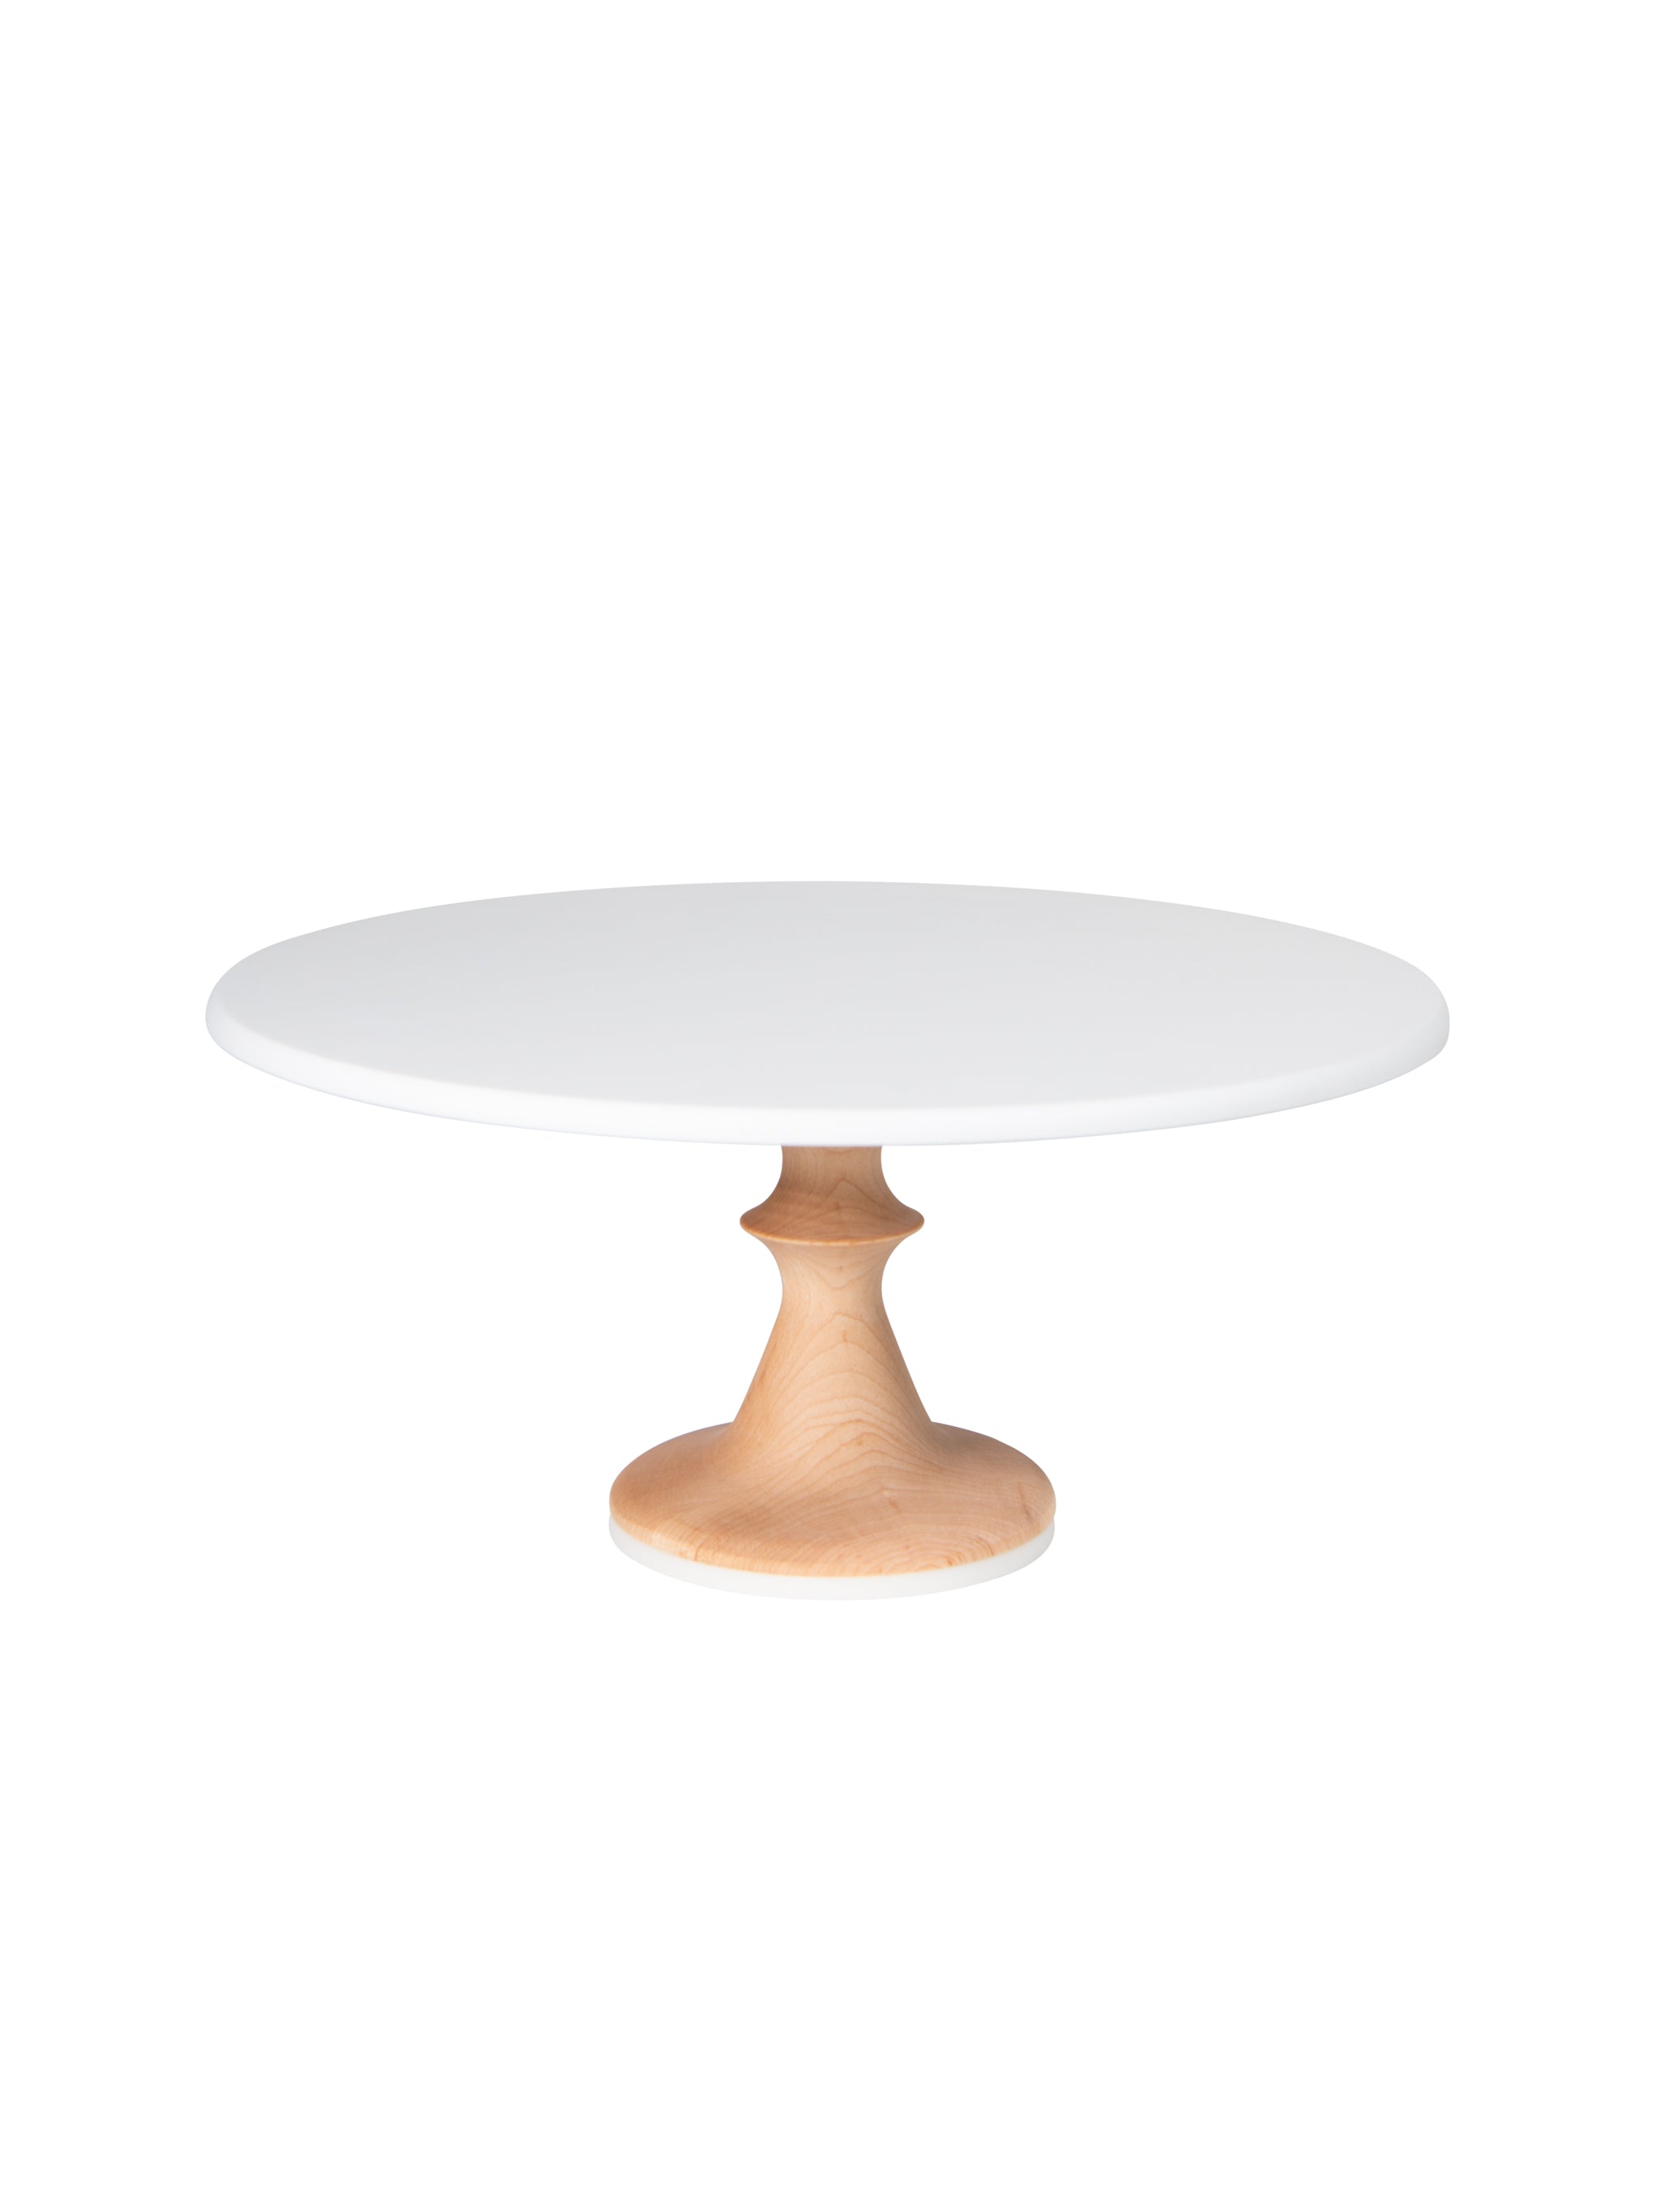 Shop Cake Stands, Platters & Domes at Weston Table